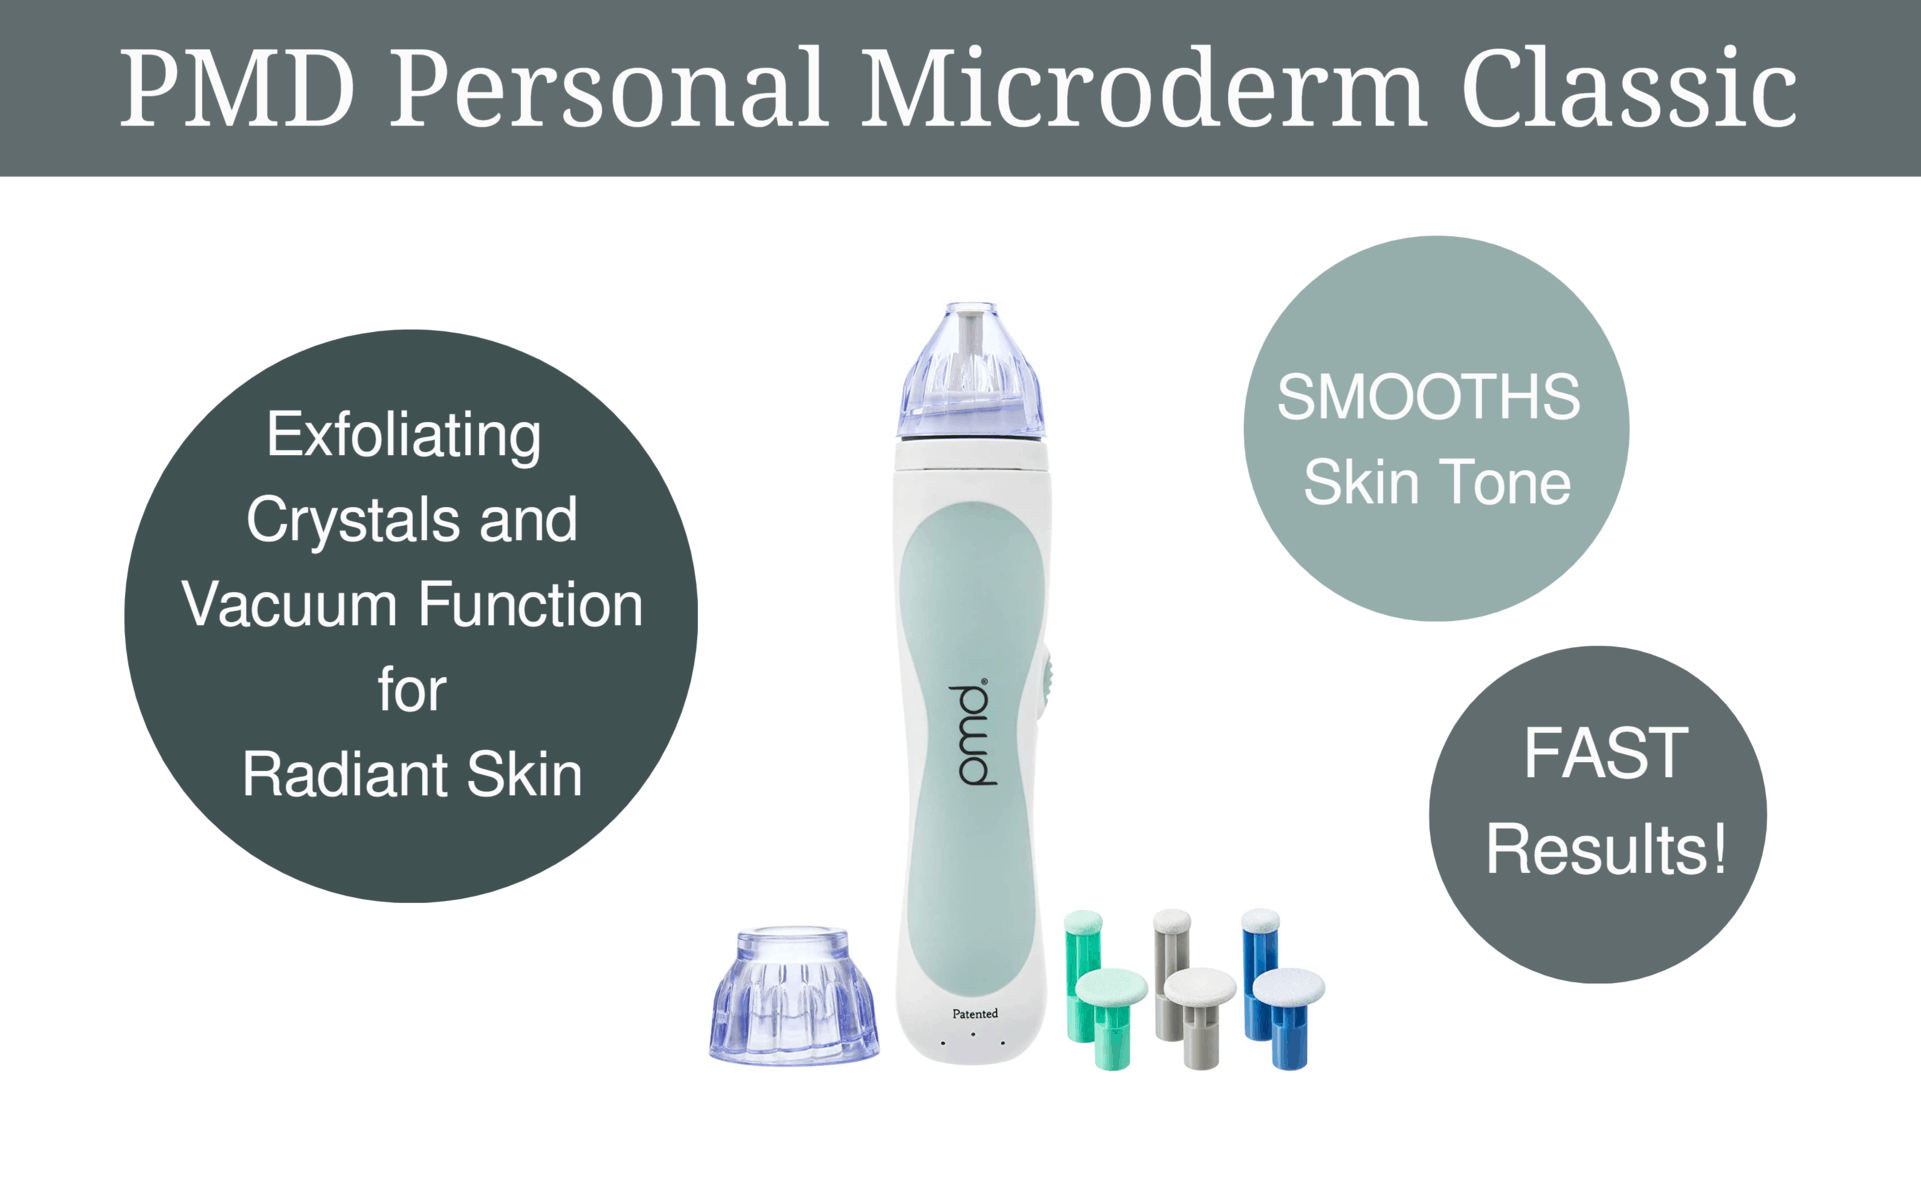 PMD Personal Microderm Classic - Advanced Skin Treatment at Home